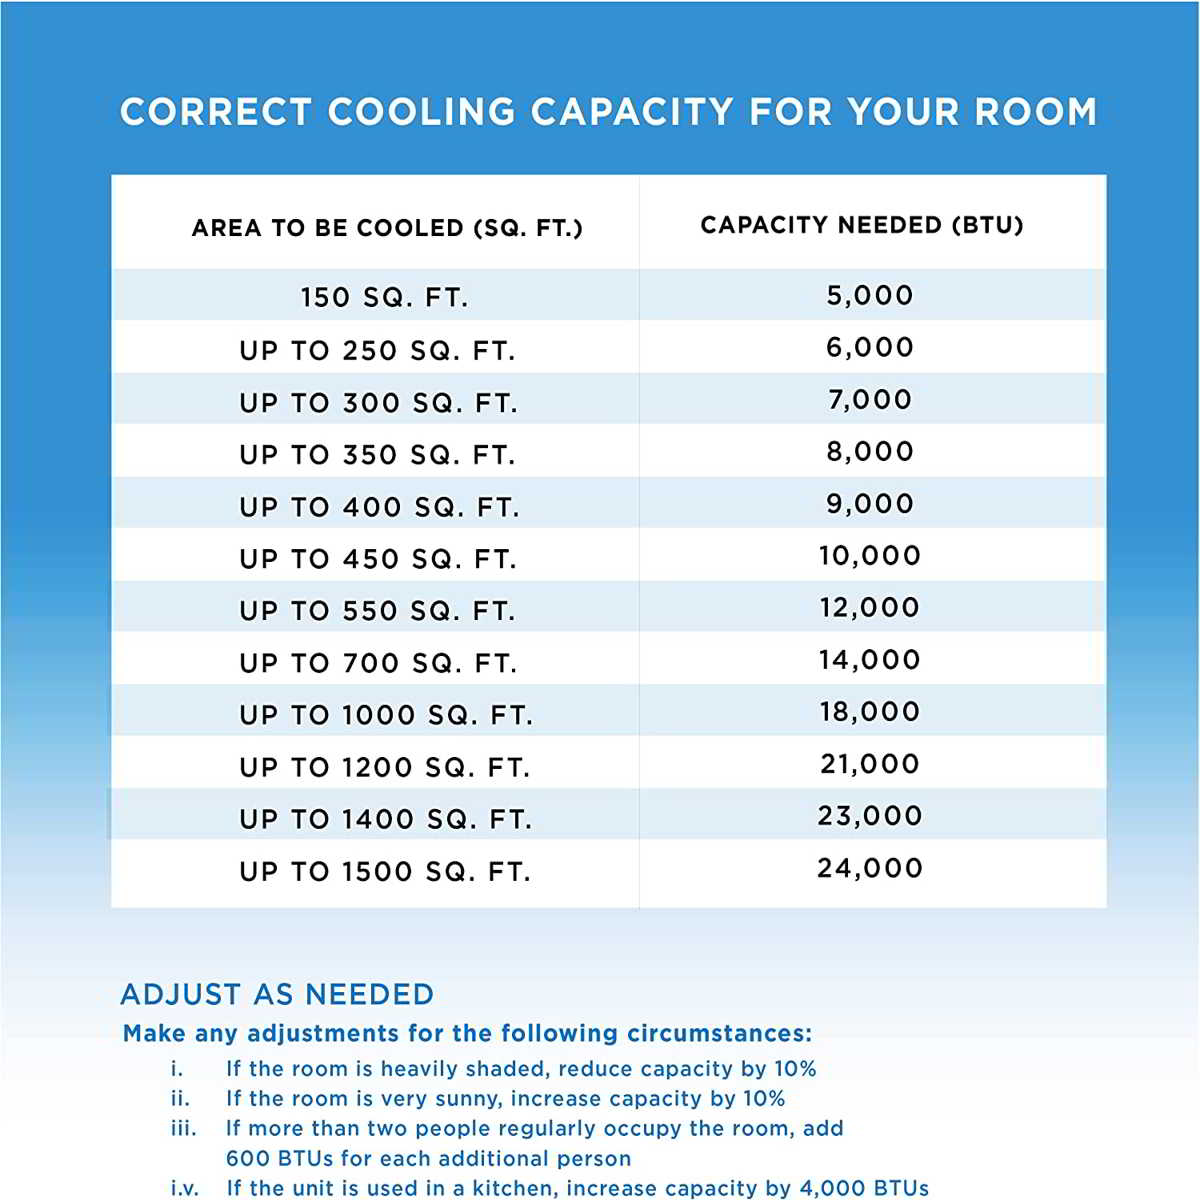 What size portable AC do I need?